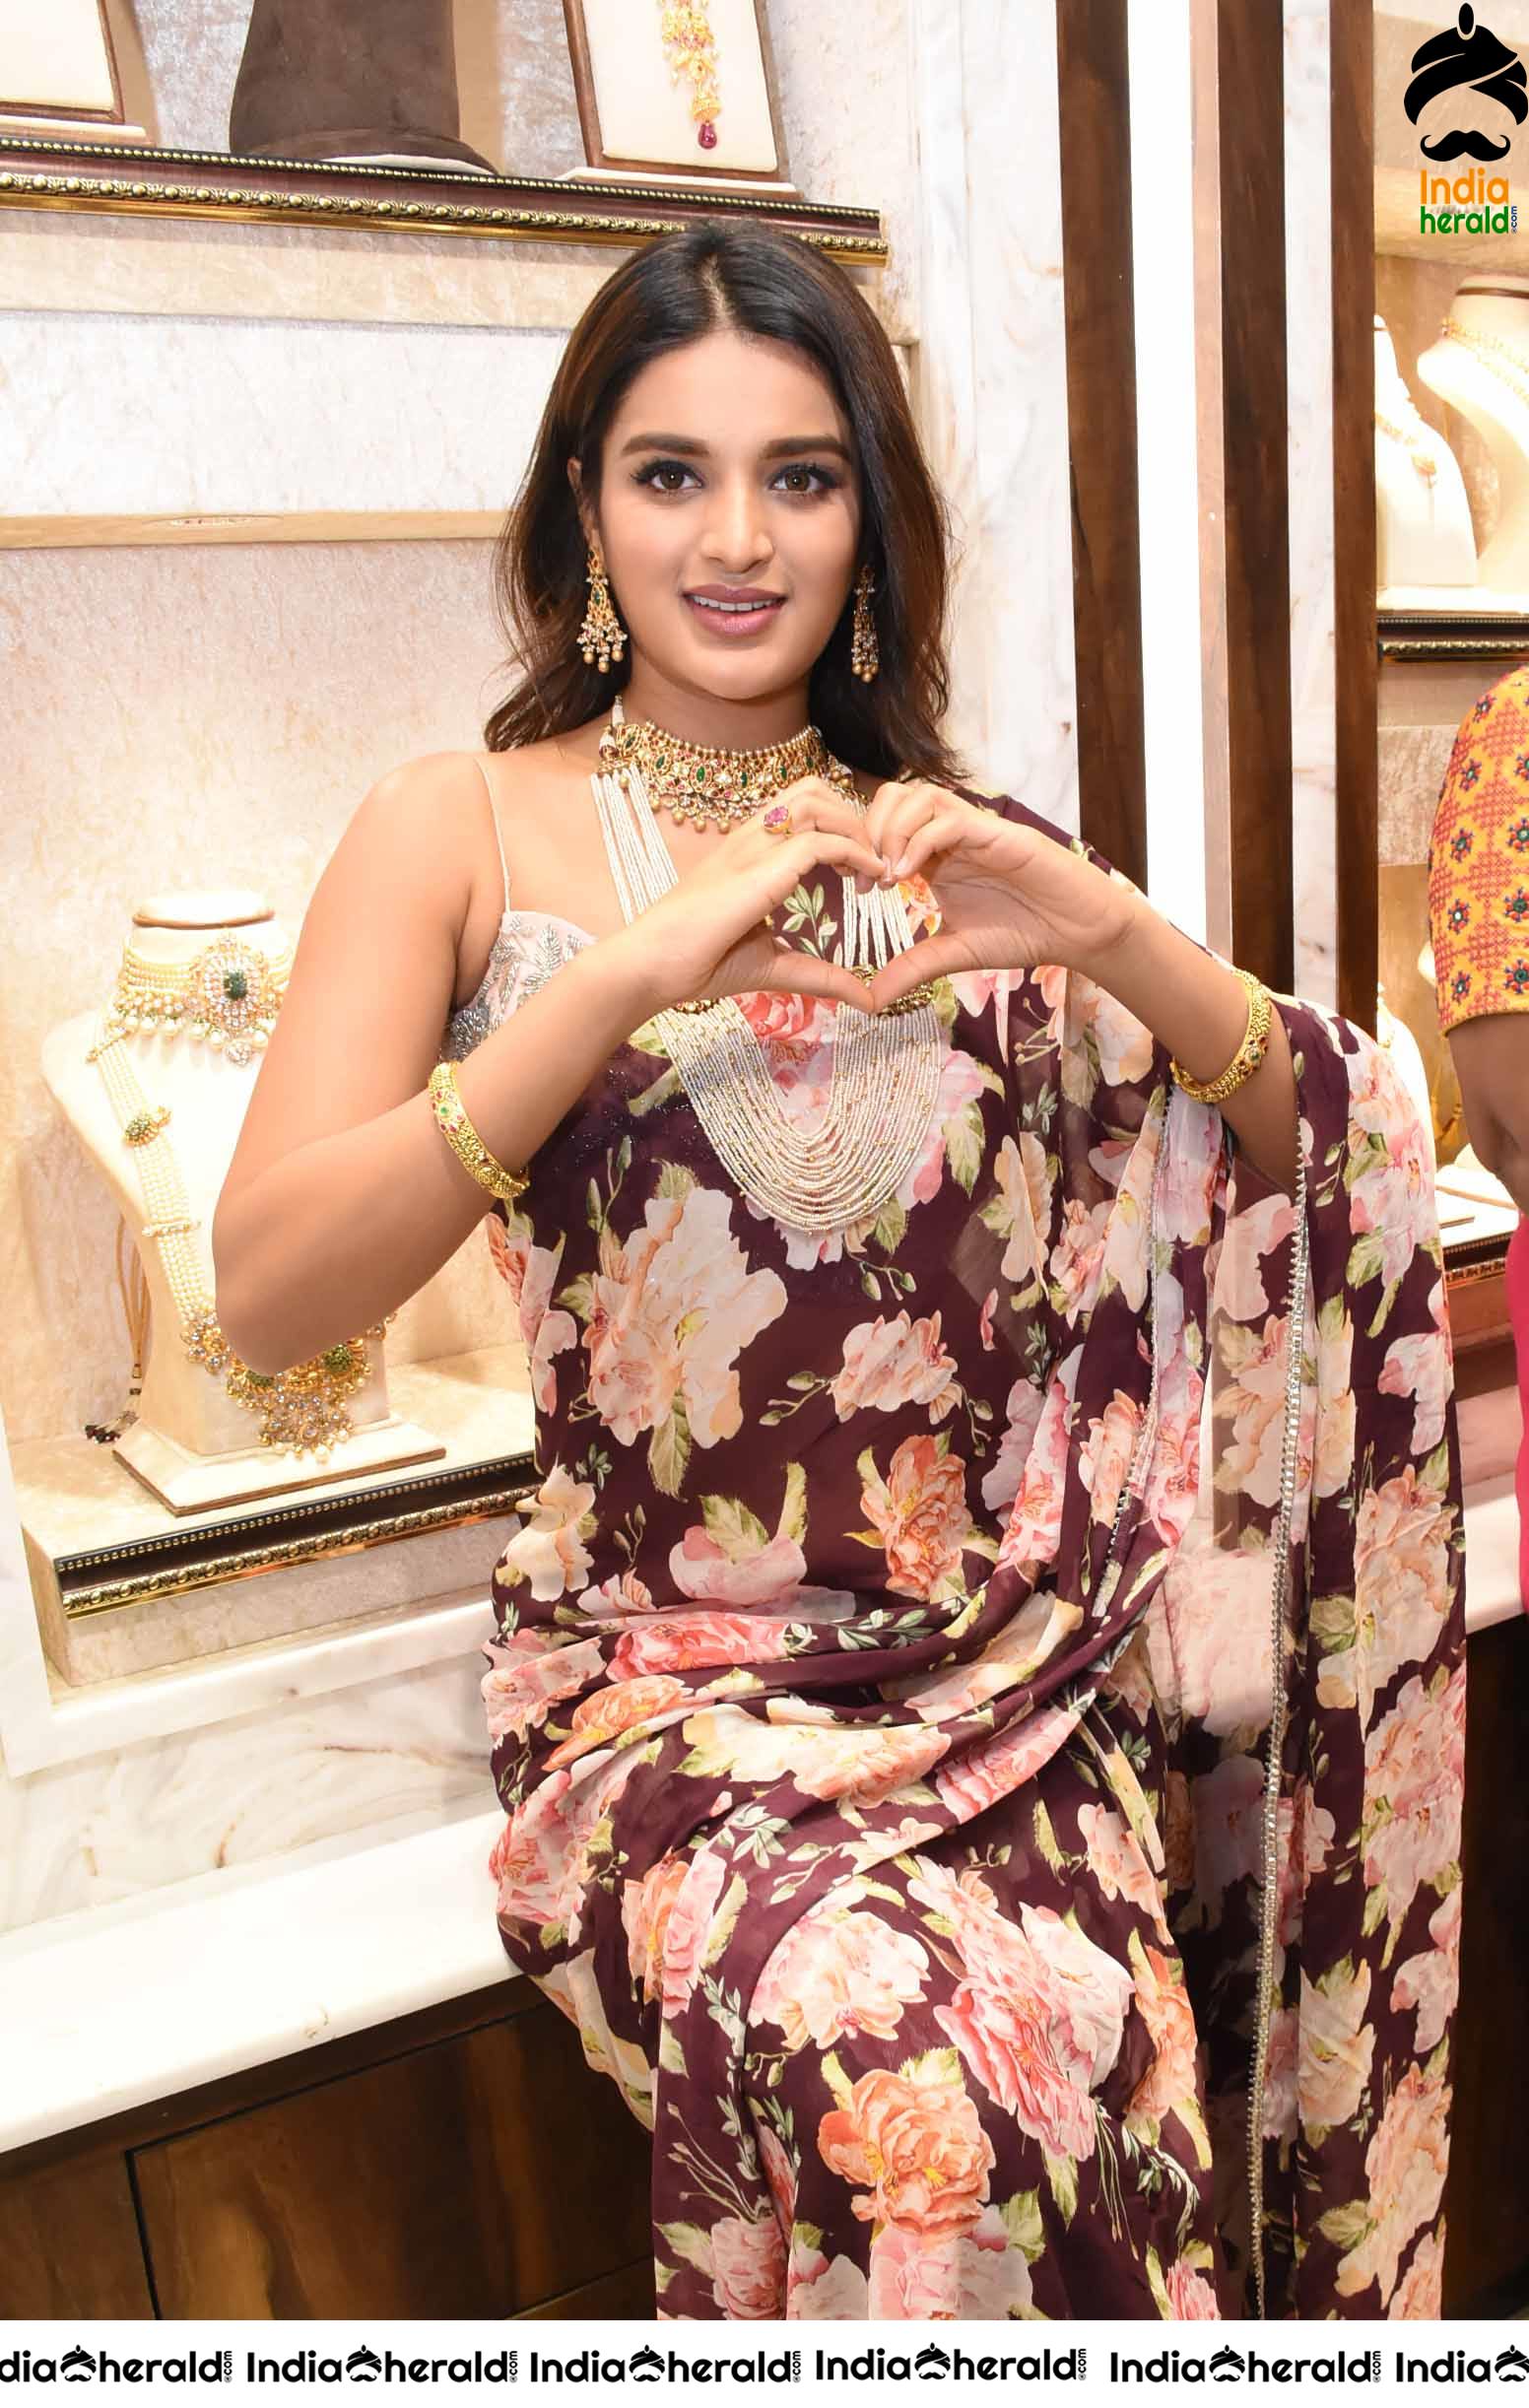 Hot Niddhi Agerwal in Saree Launches Manepally Jewellers 4th Branch at Dilsukhnagar Set 2